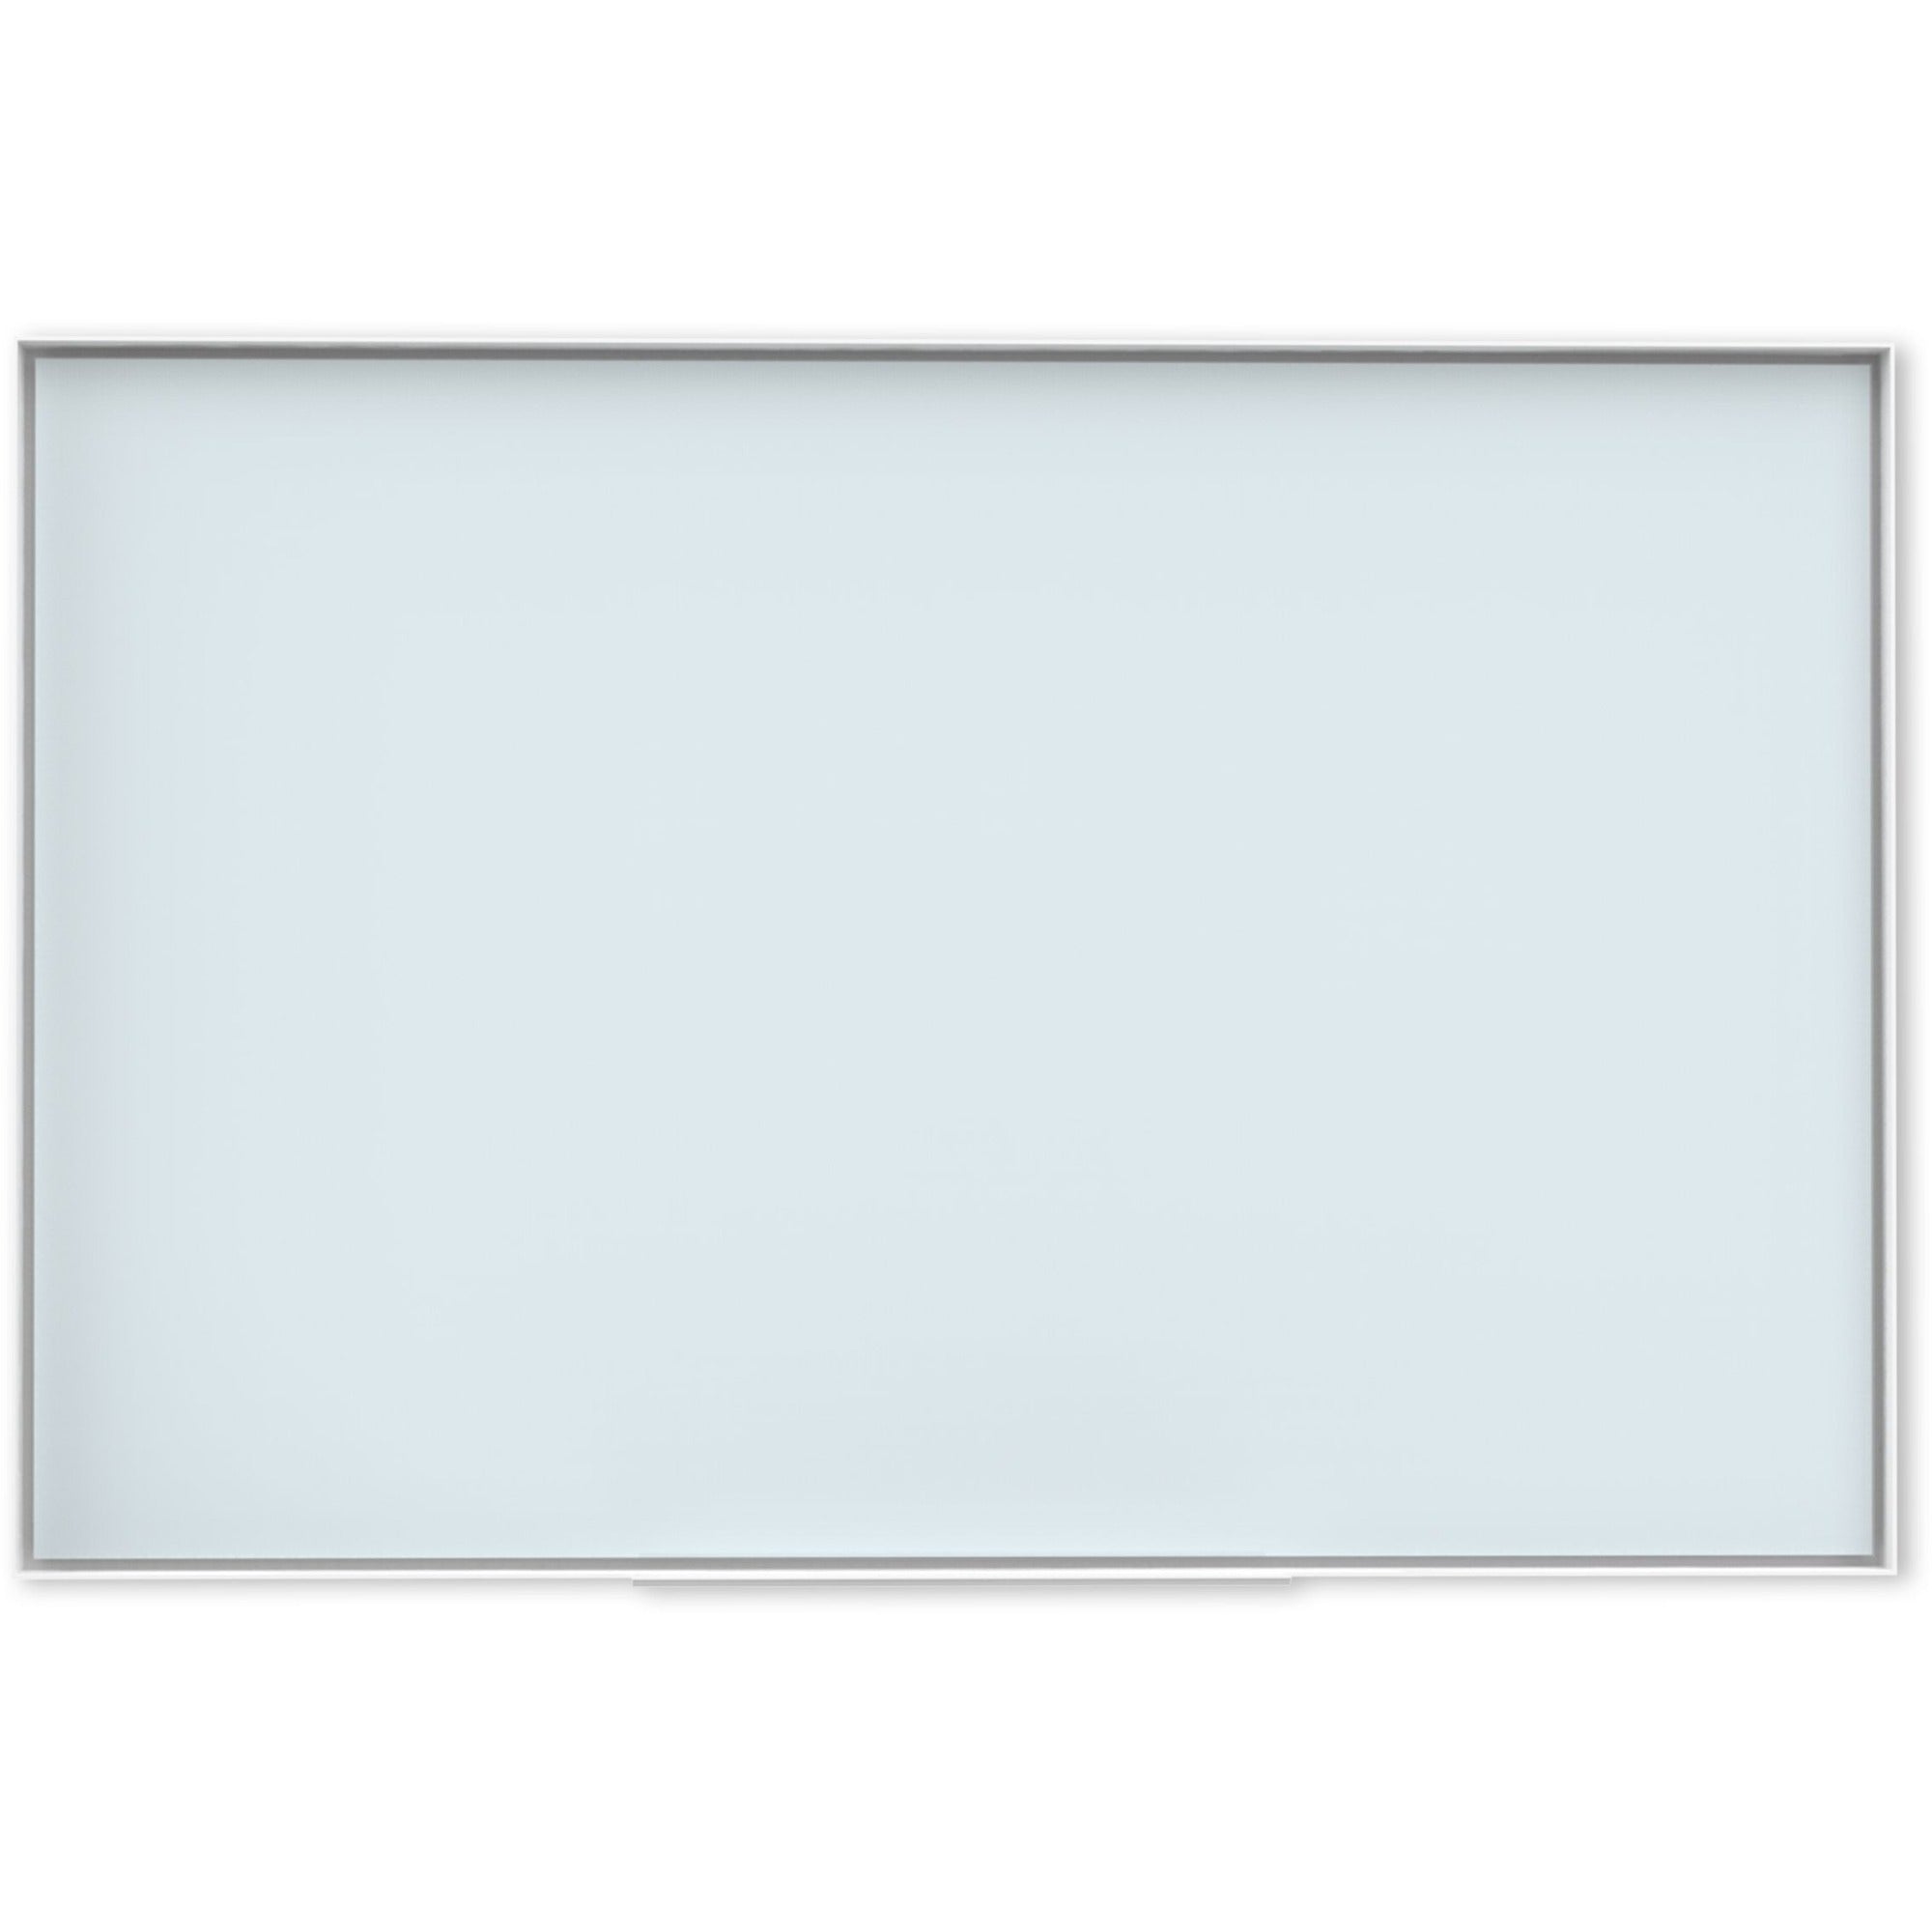 u-brands-frosted-glass-dry-erase-board-23-19-ft-width-x-35-29-ft-height-frosted-white-tempered-glass-surface-white-aluminum-frame-rectangle-horizontal-vertical-1-each_ubr2824u0001 - 1